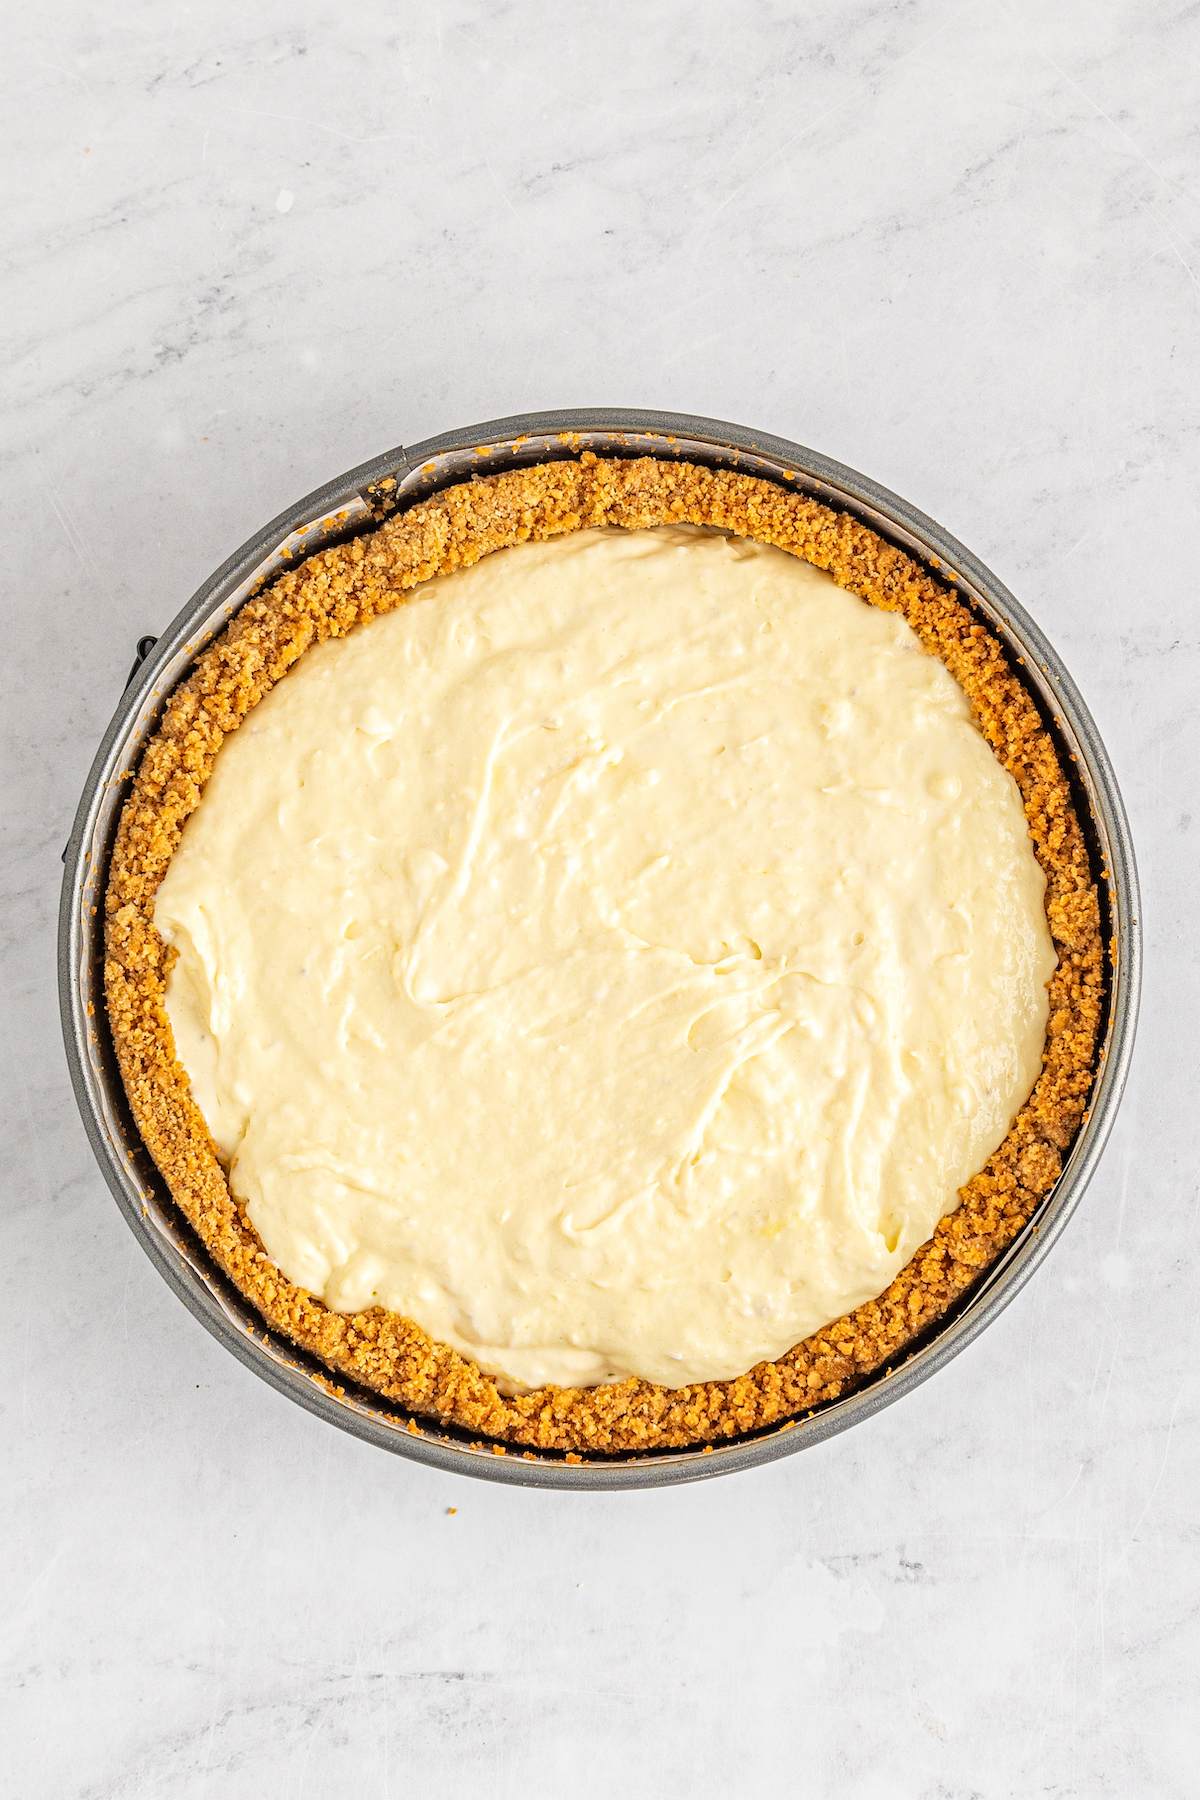 Uncooked banana pudding cheesecake in a cake pan